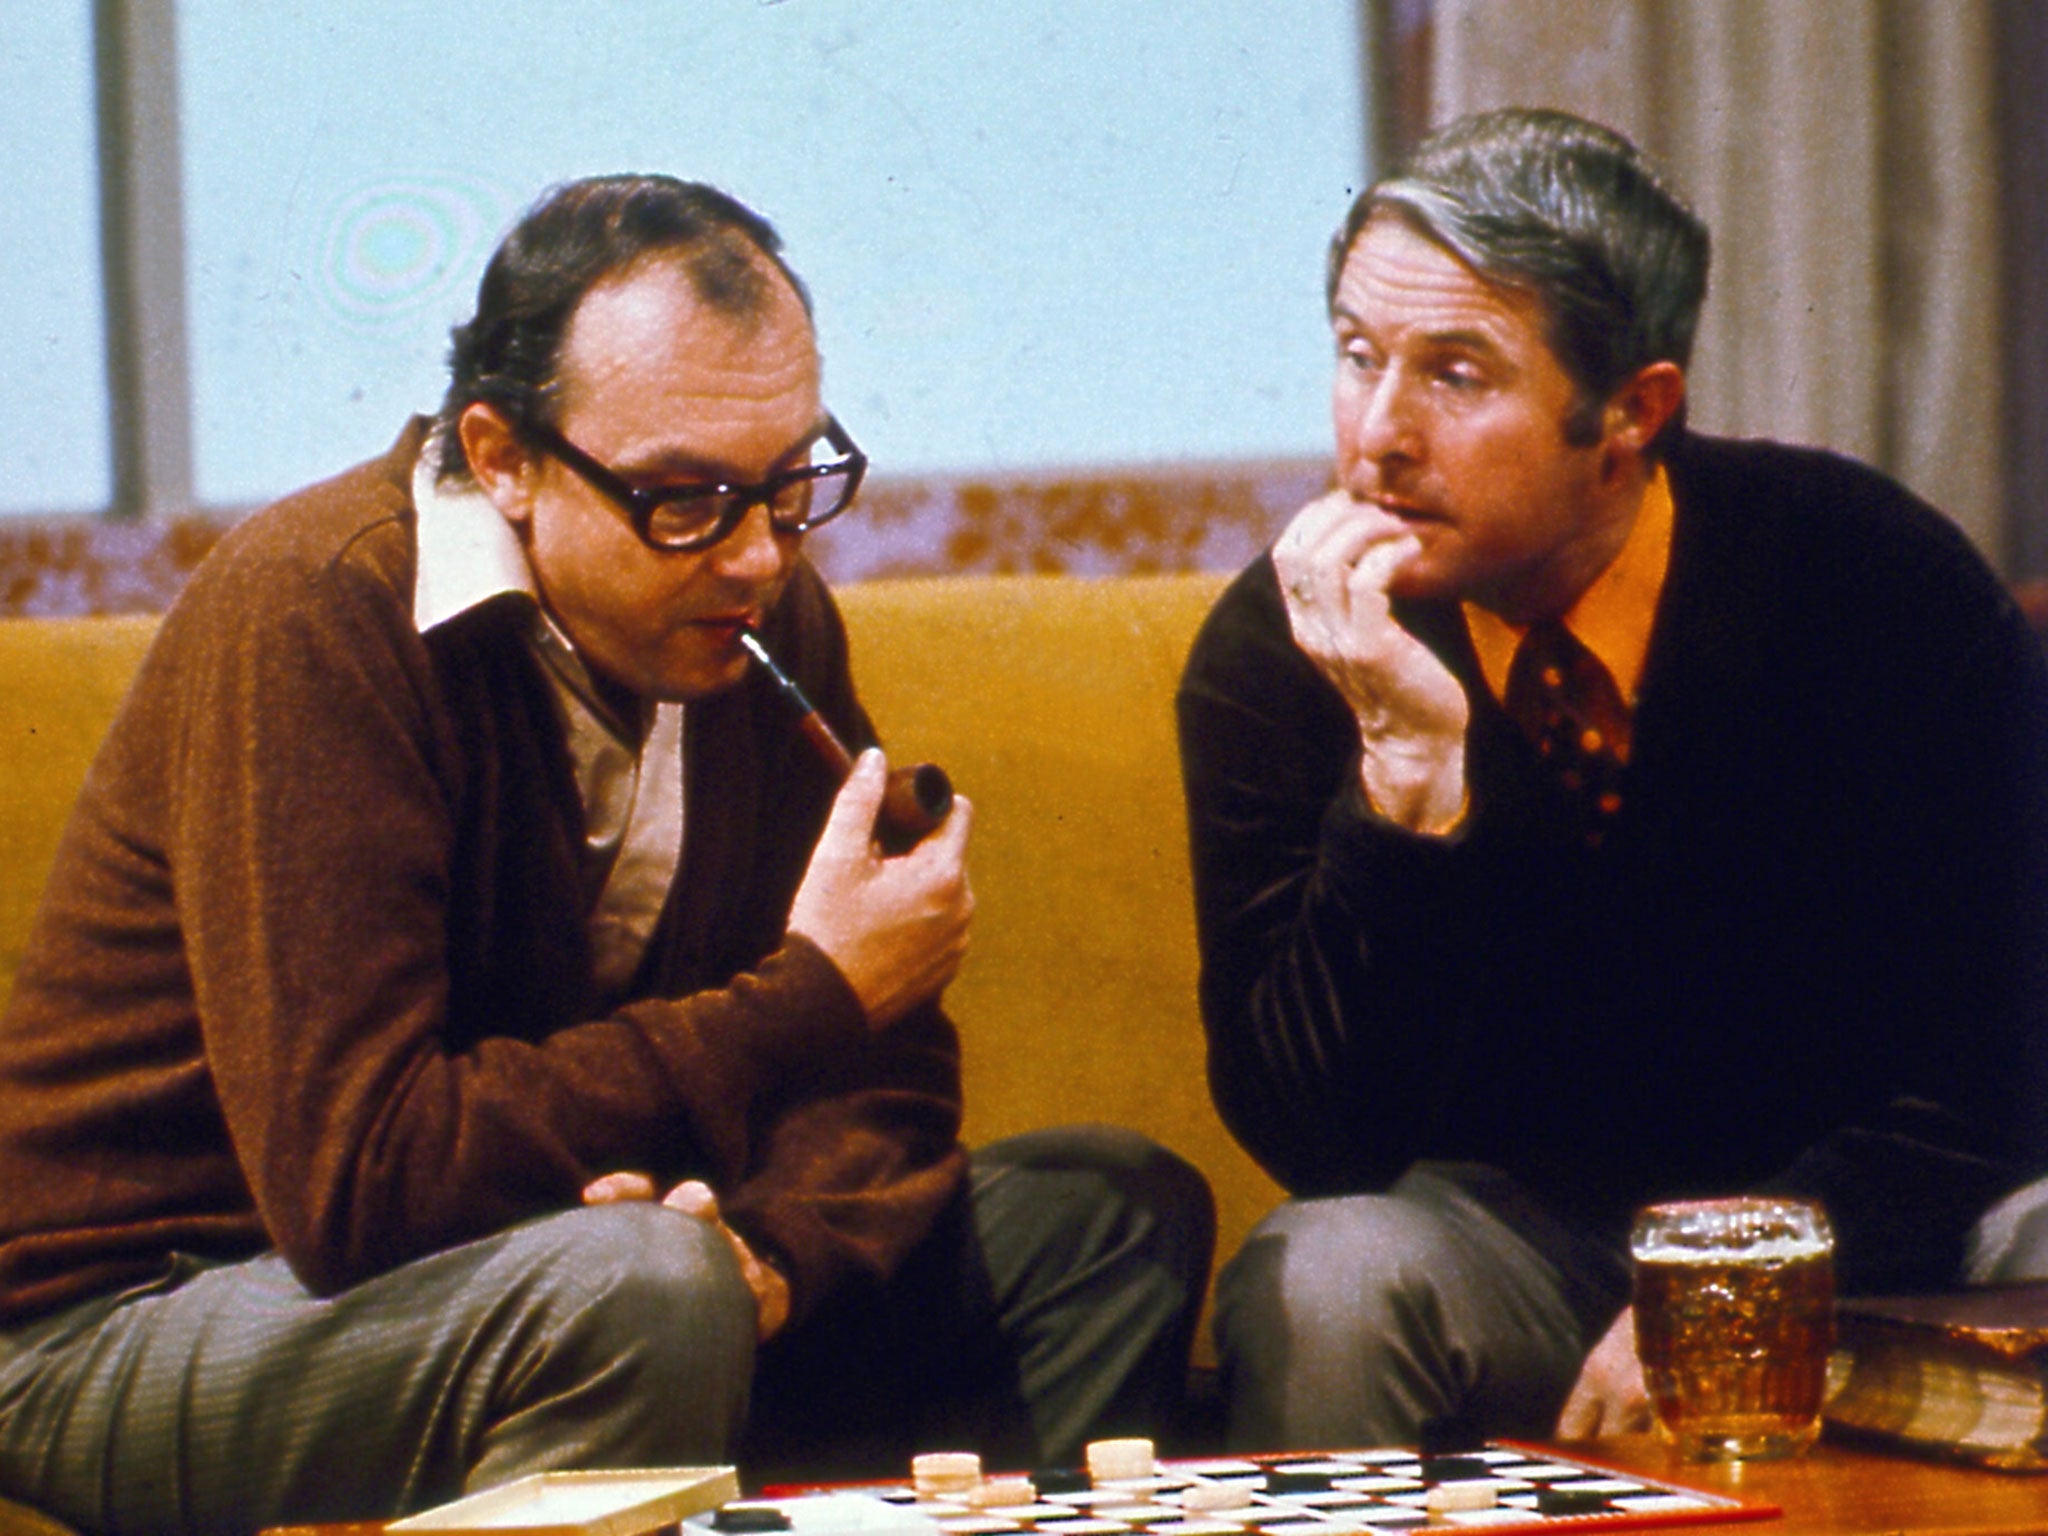 The comedy duo on their television show in 1973